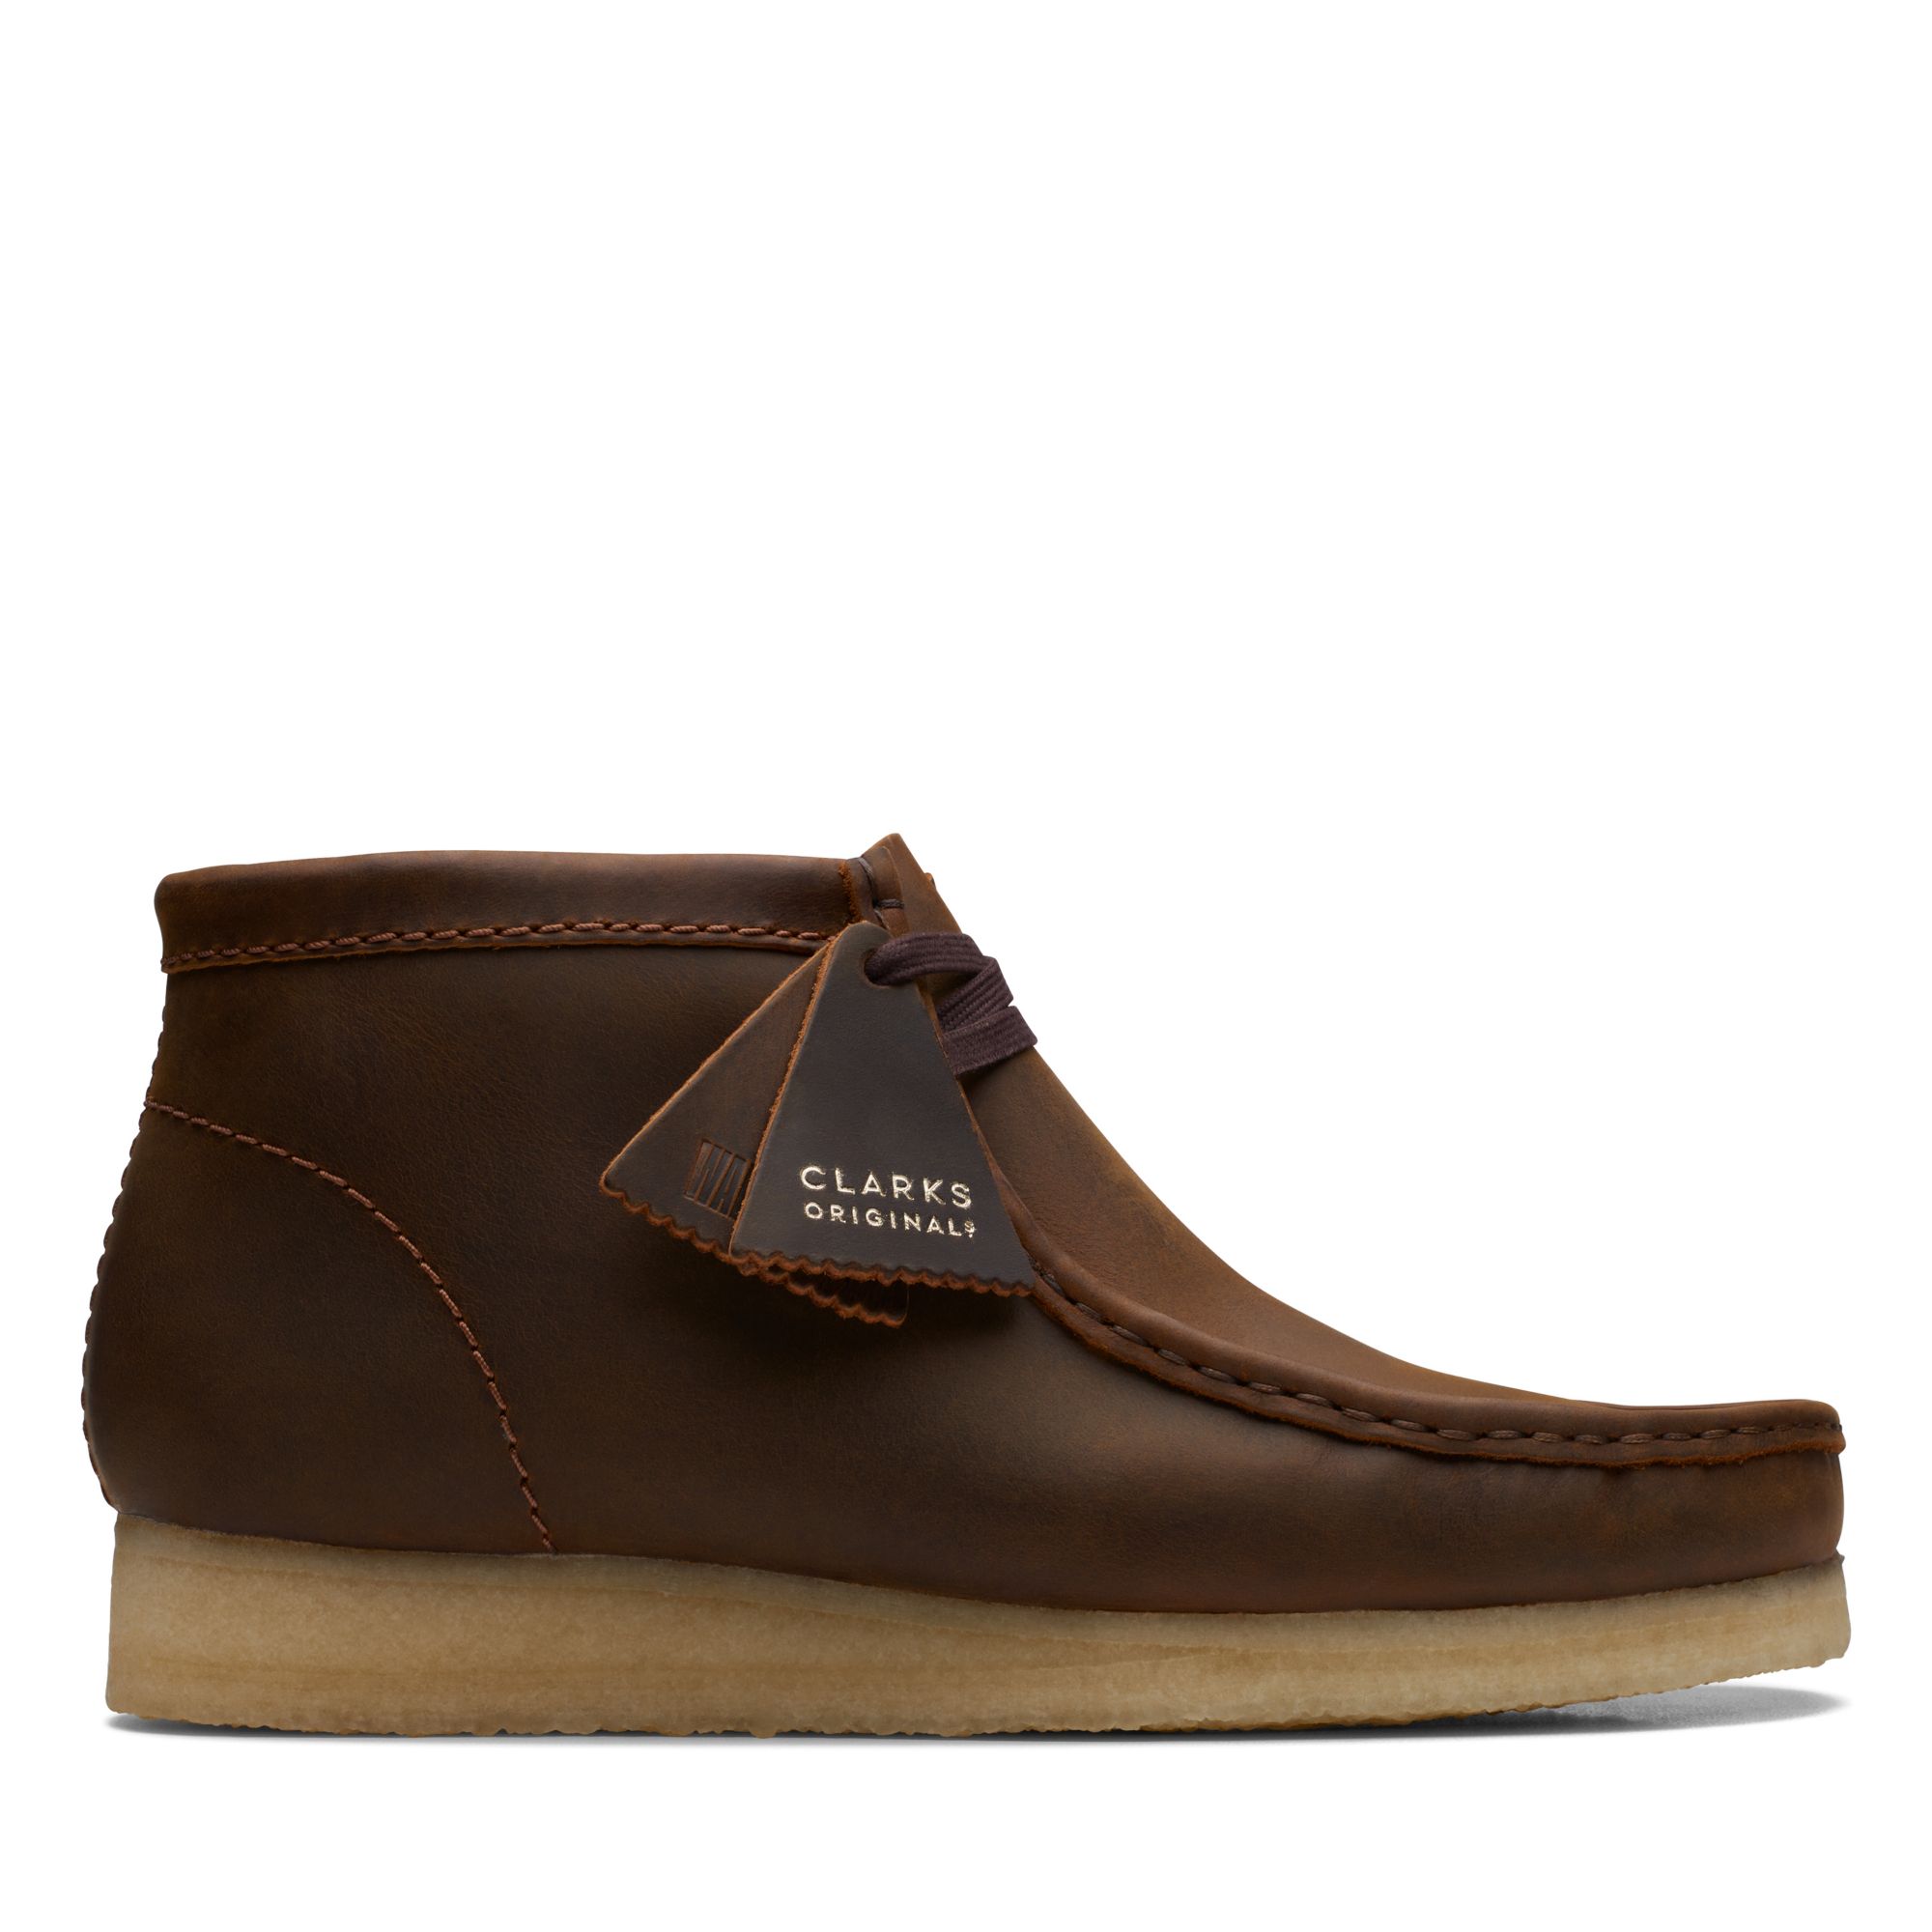 Clarks Originals Wallabee Leather Boots (Beeswax)